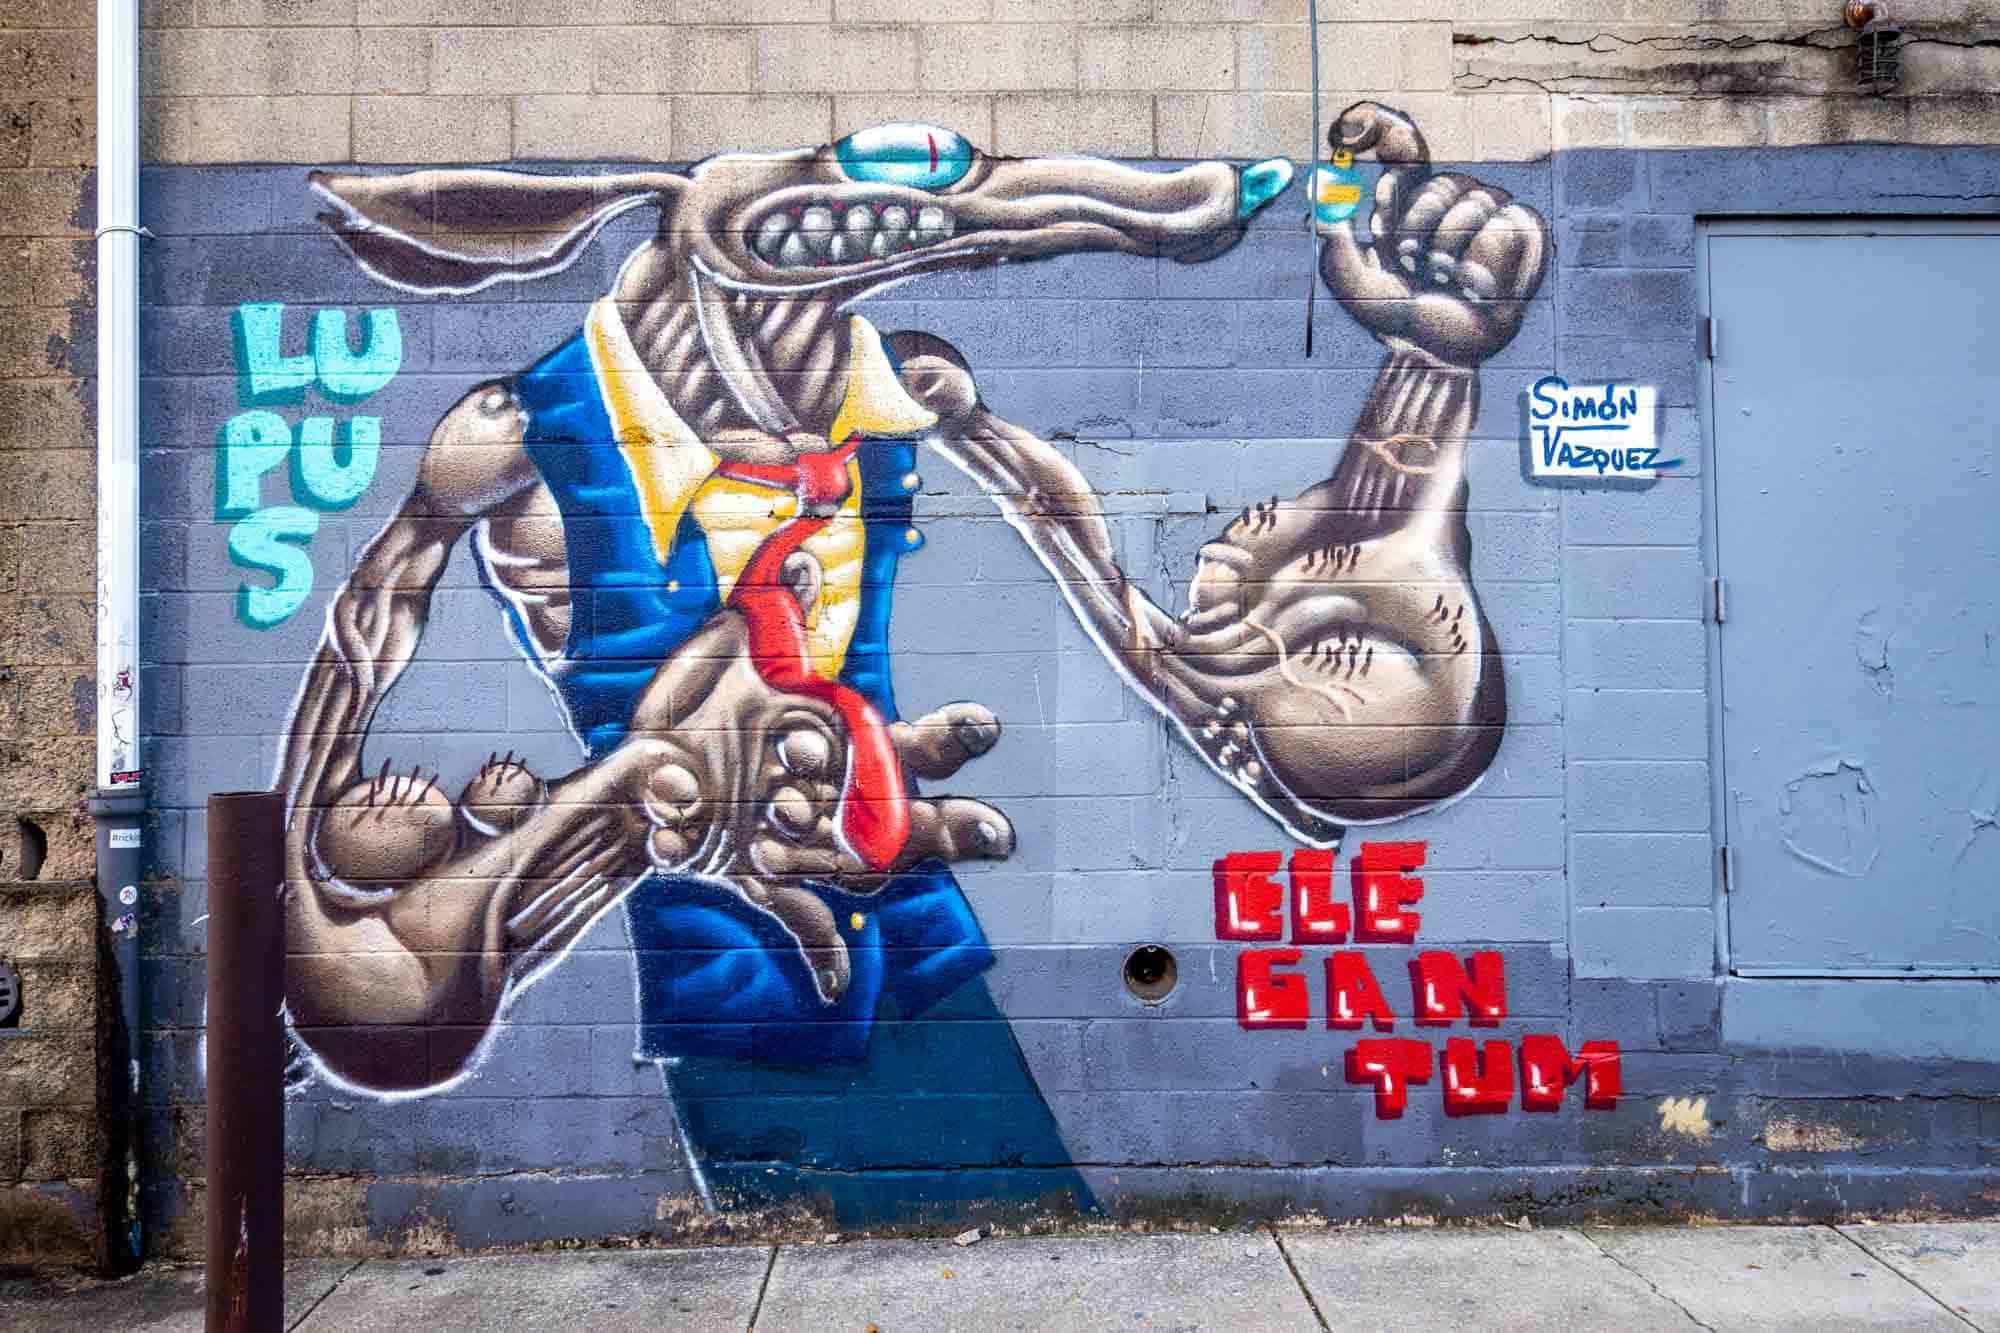 Street art mural of a rat-like creature wearing a vest and tie 